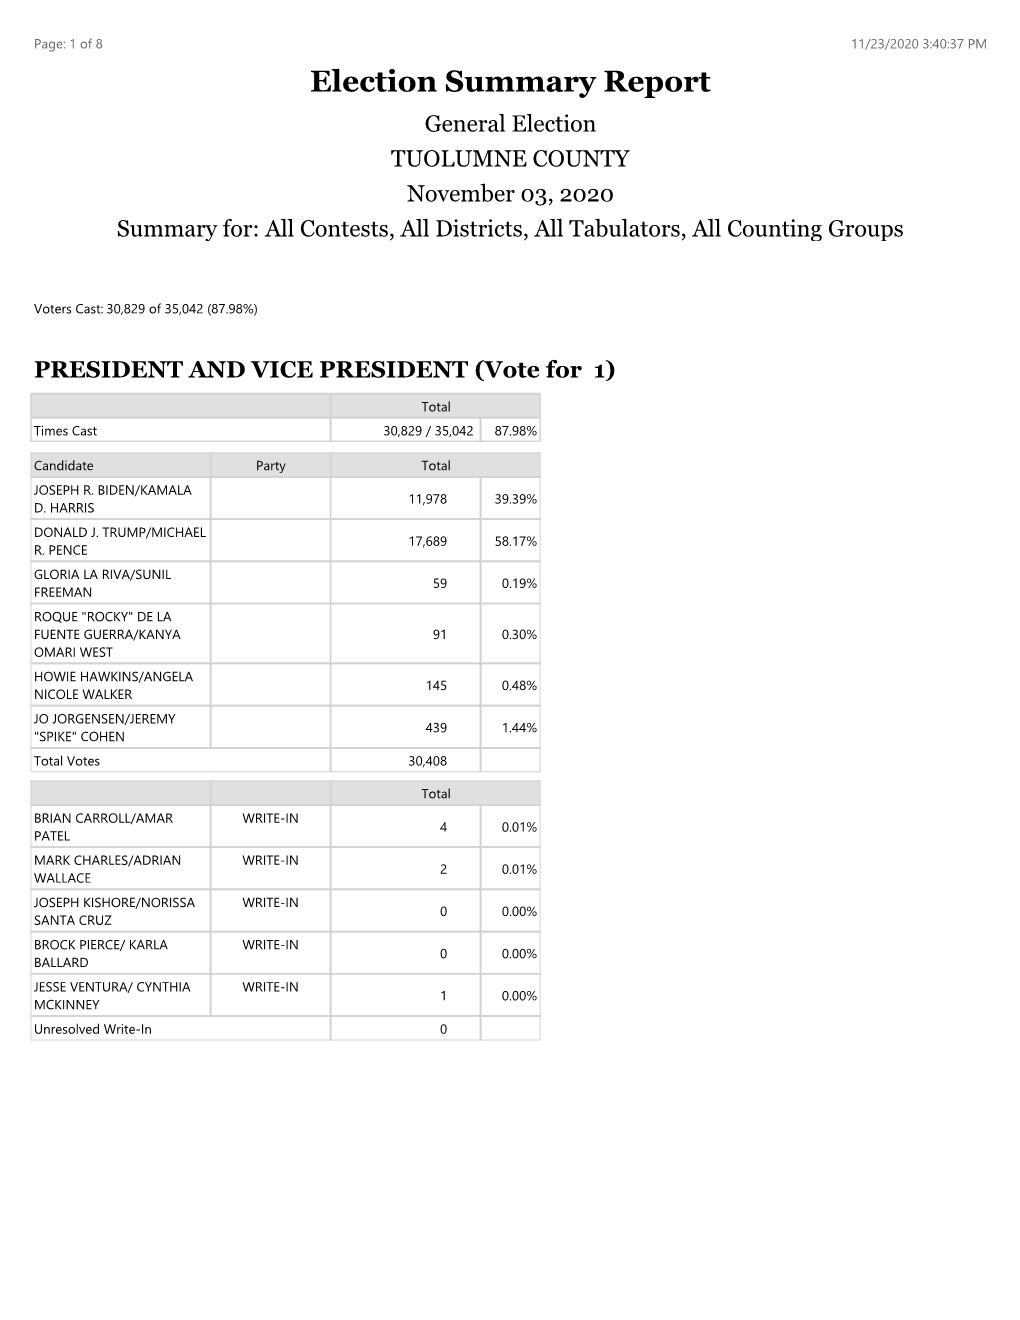 Election Summary Report General Election TUOLUMNE COUNTY November 03, 2020 Summary For: All Contests, All Districts, All Tabulators, All Counting Groups